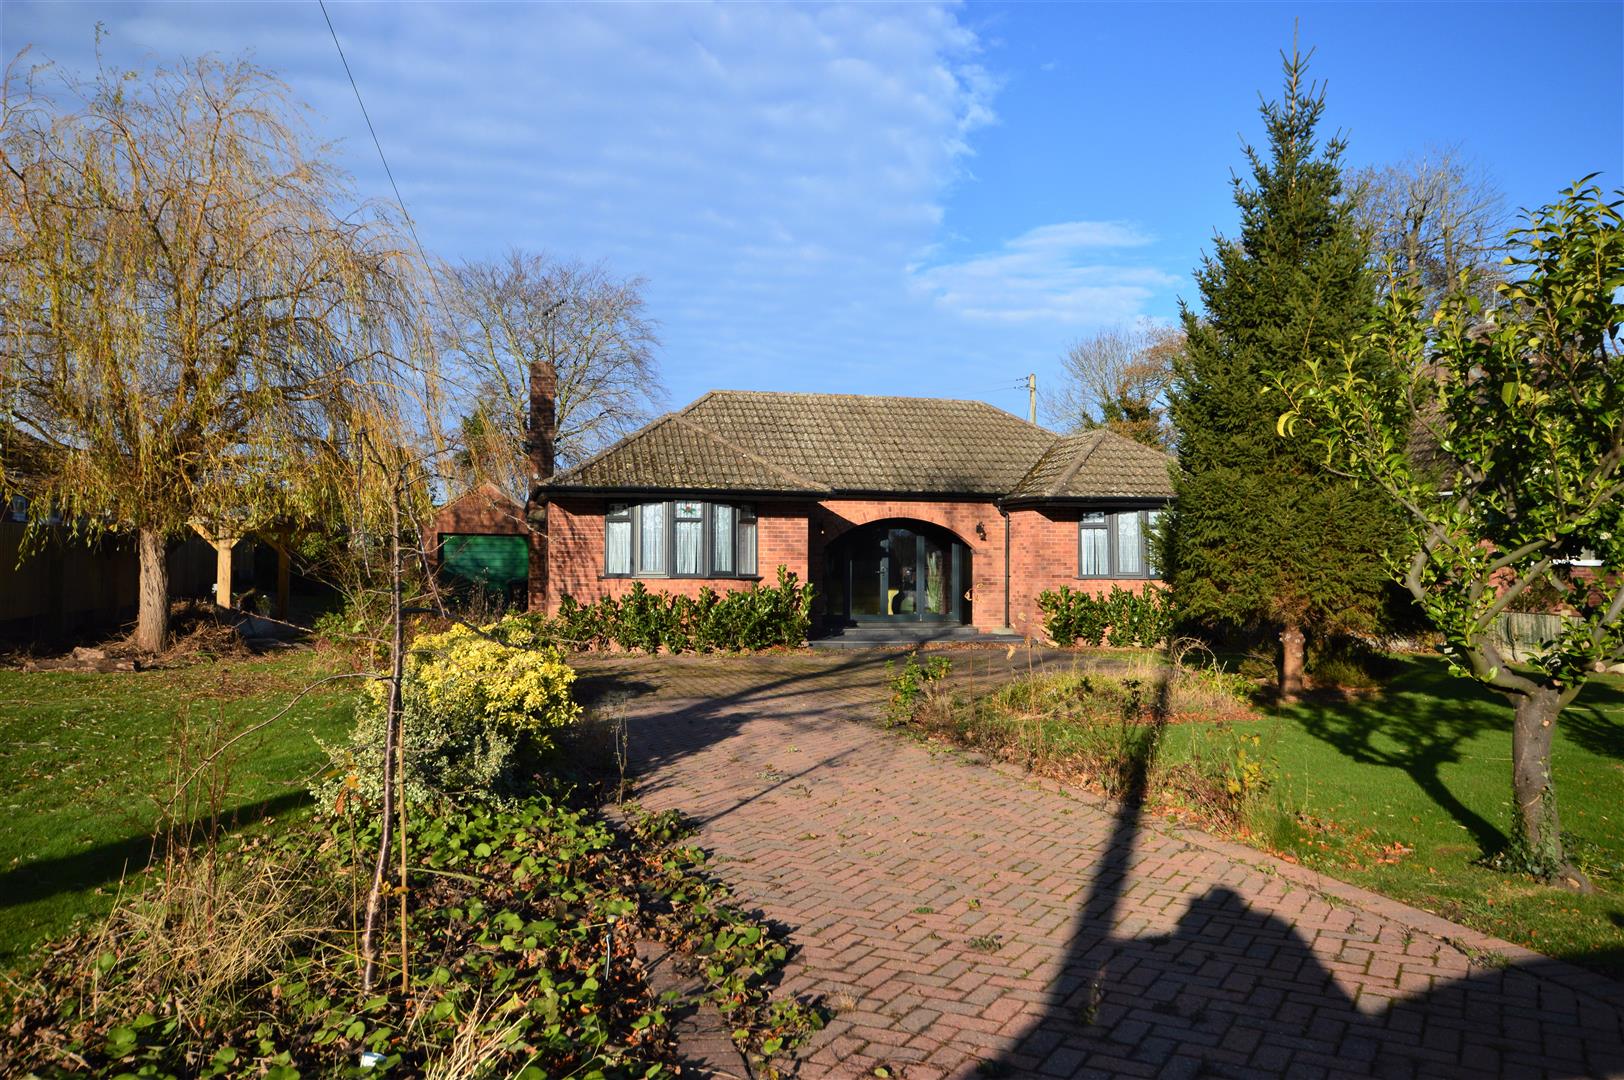 2 bed detached bungalow for sale in Leominster, HR6